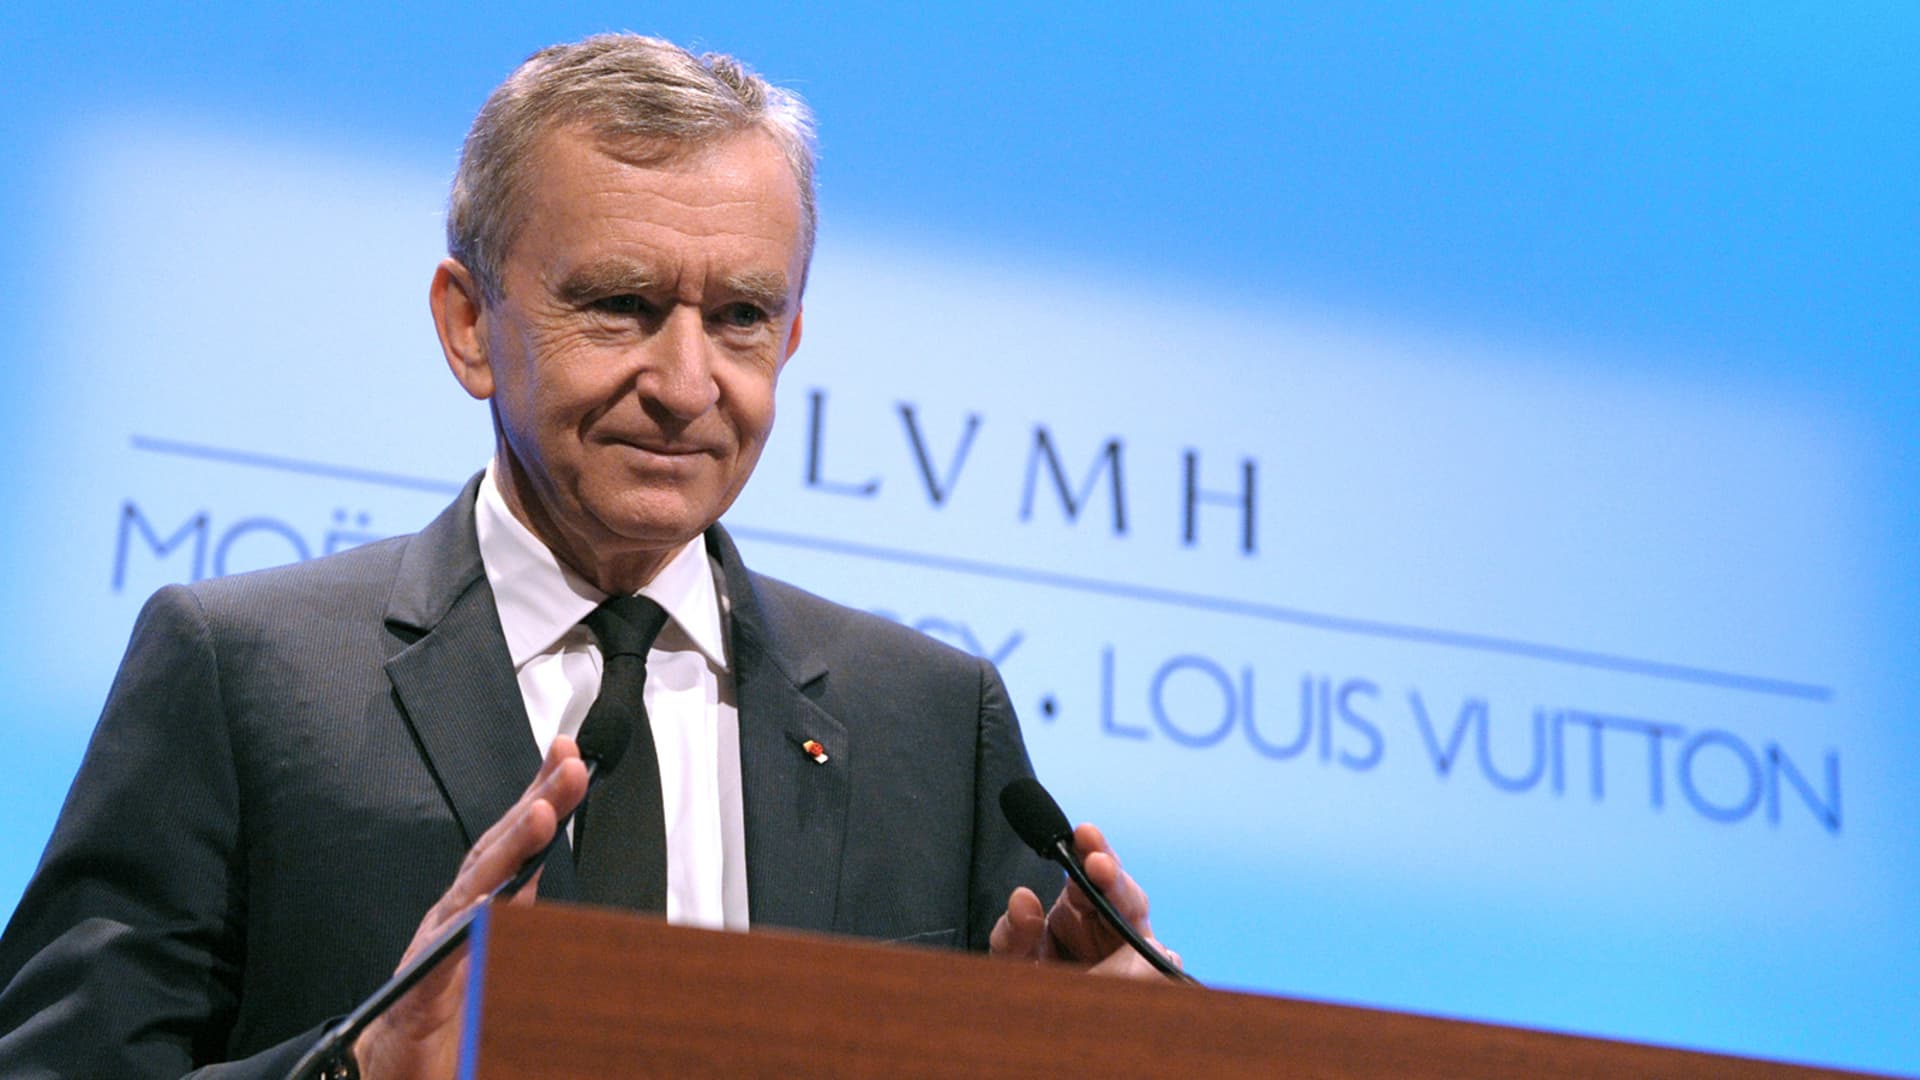 LVMH's Arnault rules out Le Pen victory in France